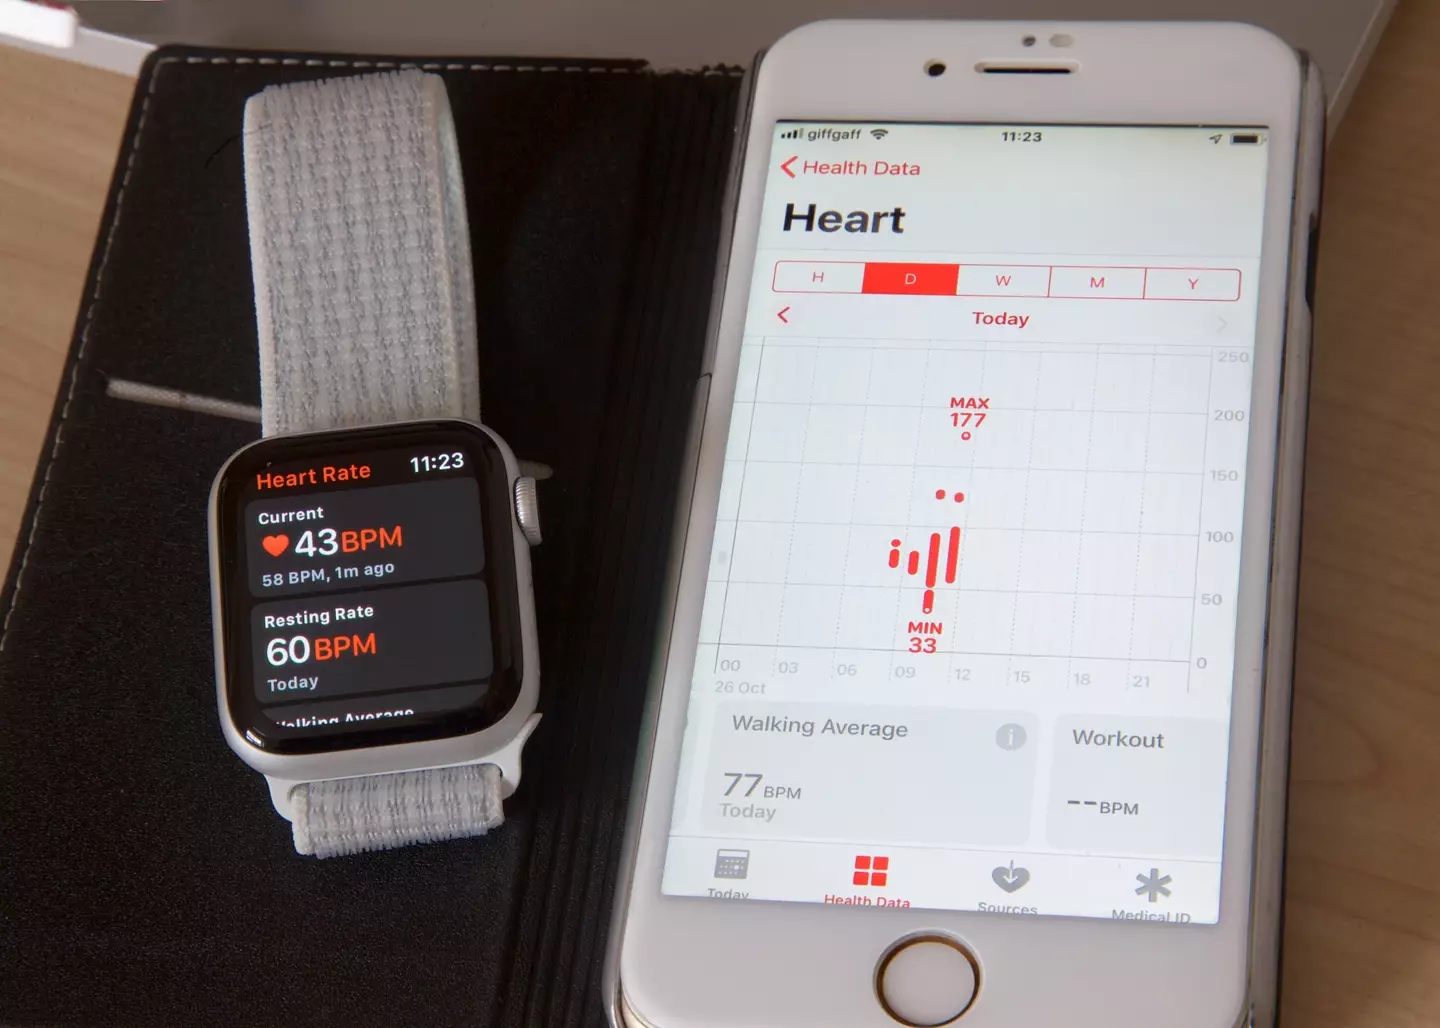 The Apple Series 4 watch came with its own heart rate monitoring technology.